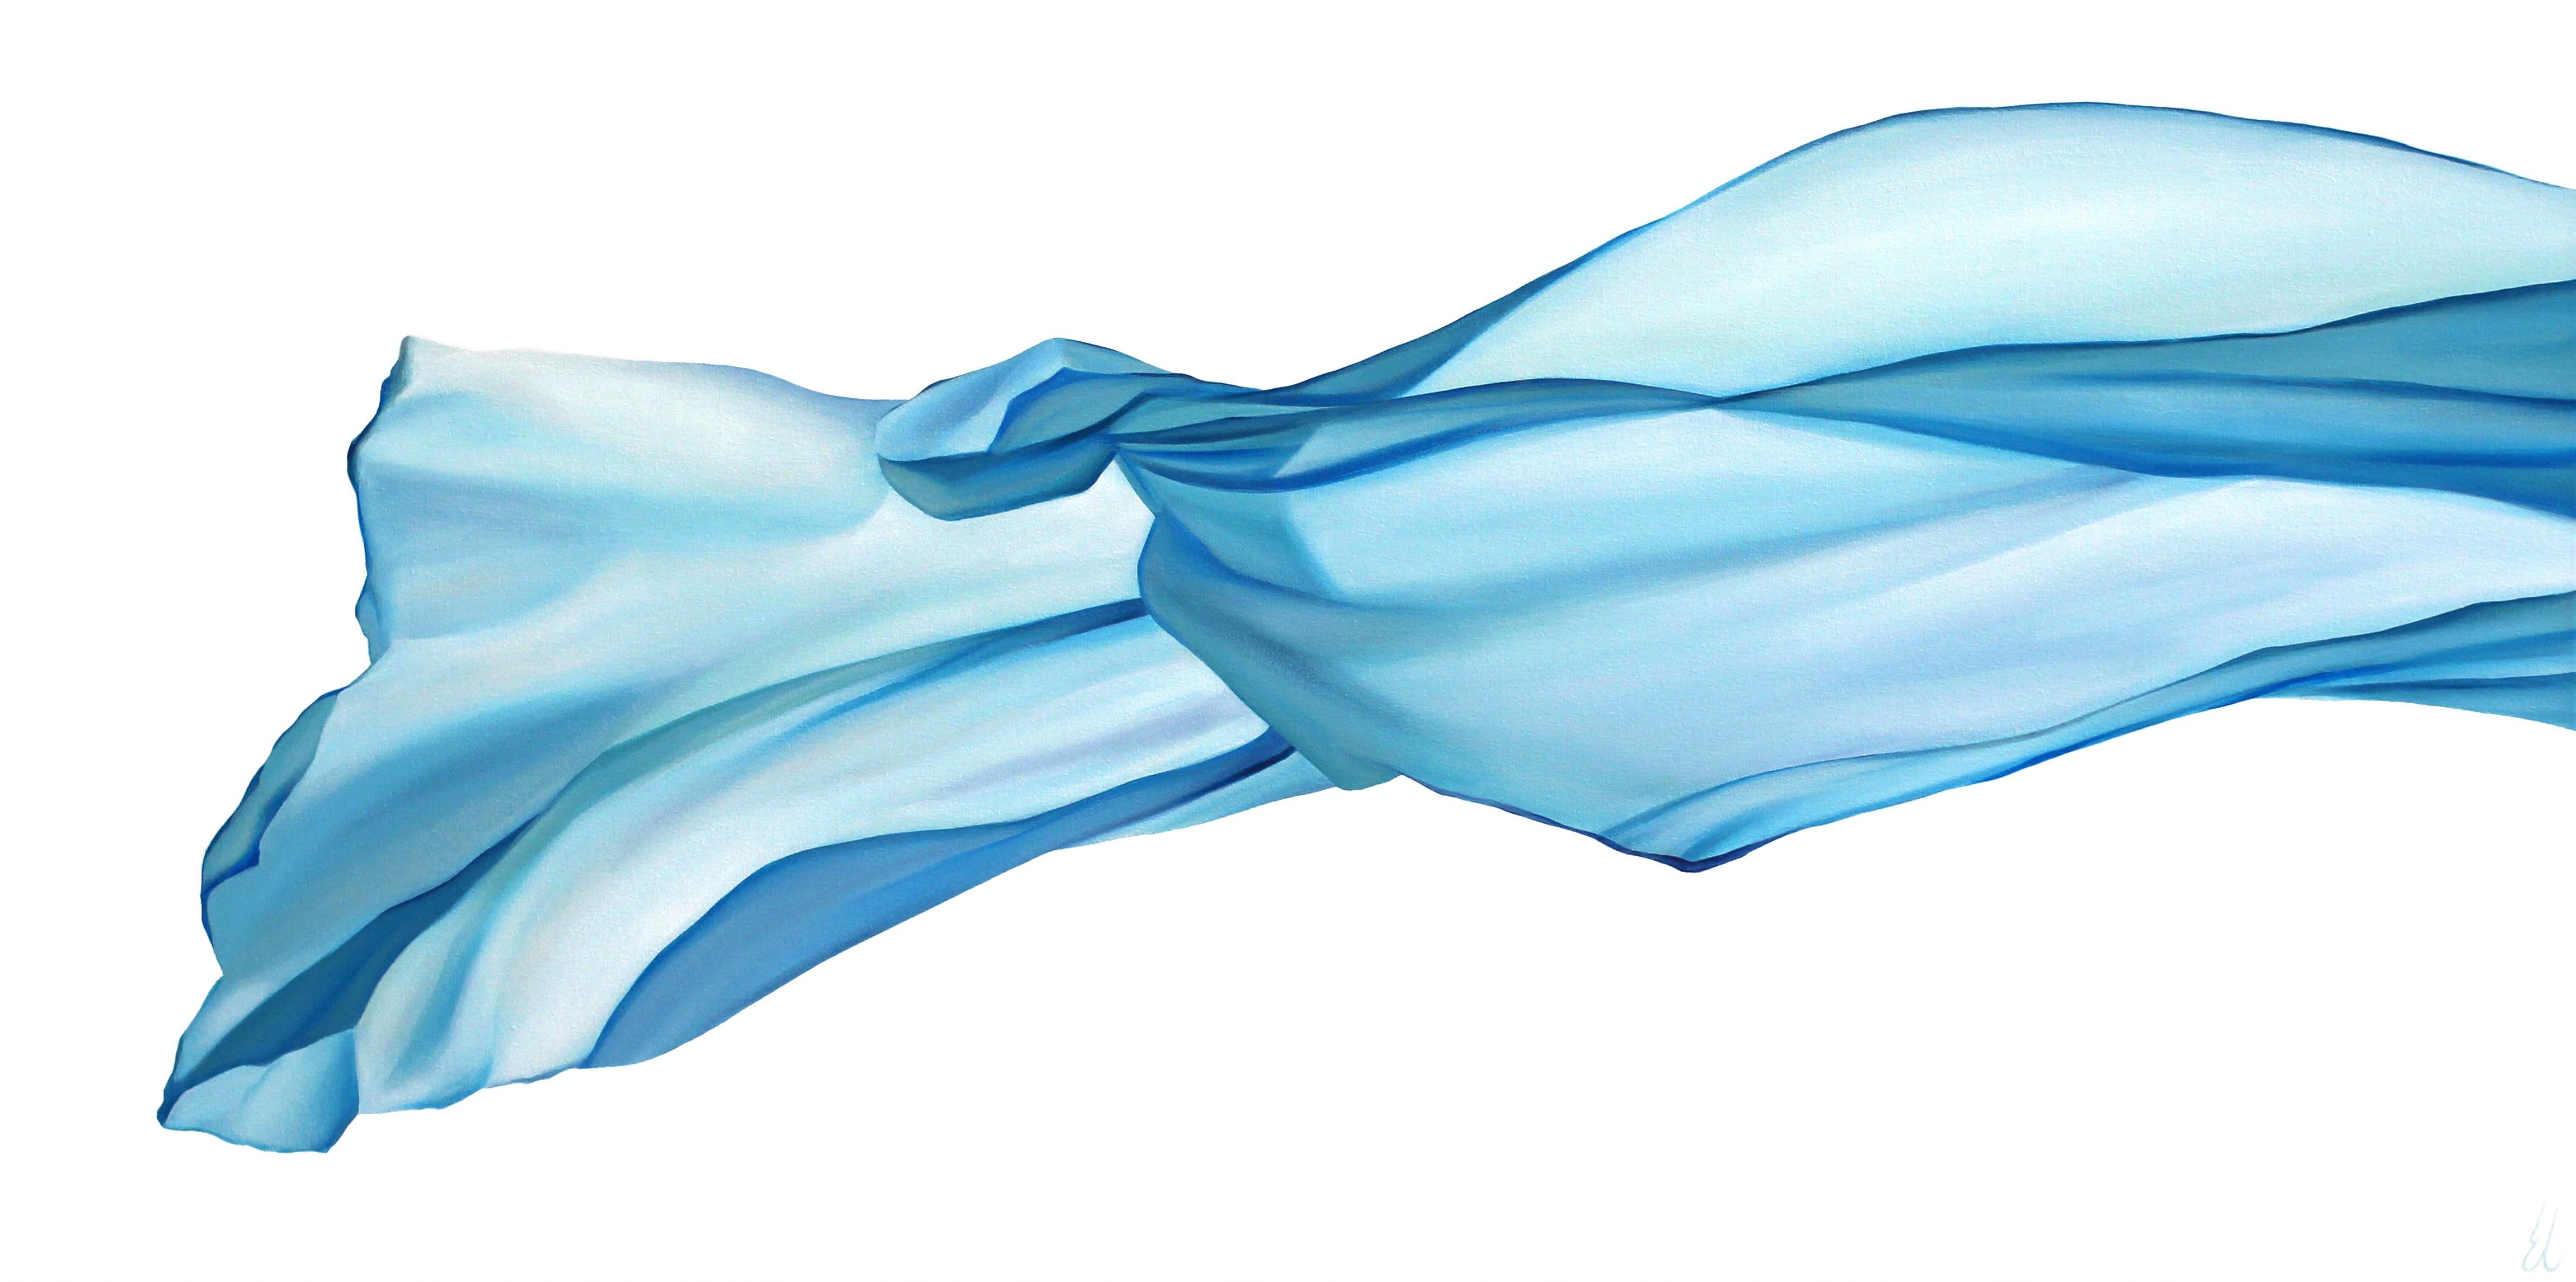 Erin Cone Still-Life Painting - Released 2, acrylic on canvas, modern realism, abstract blue flowing fabric veil